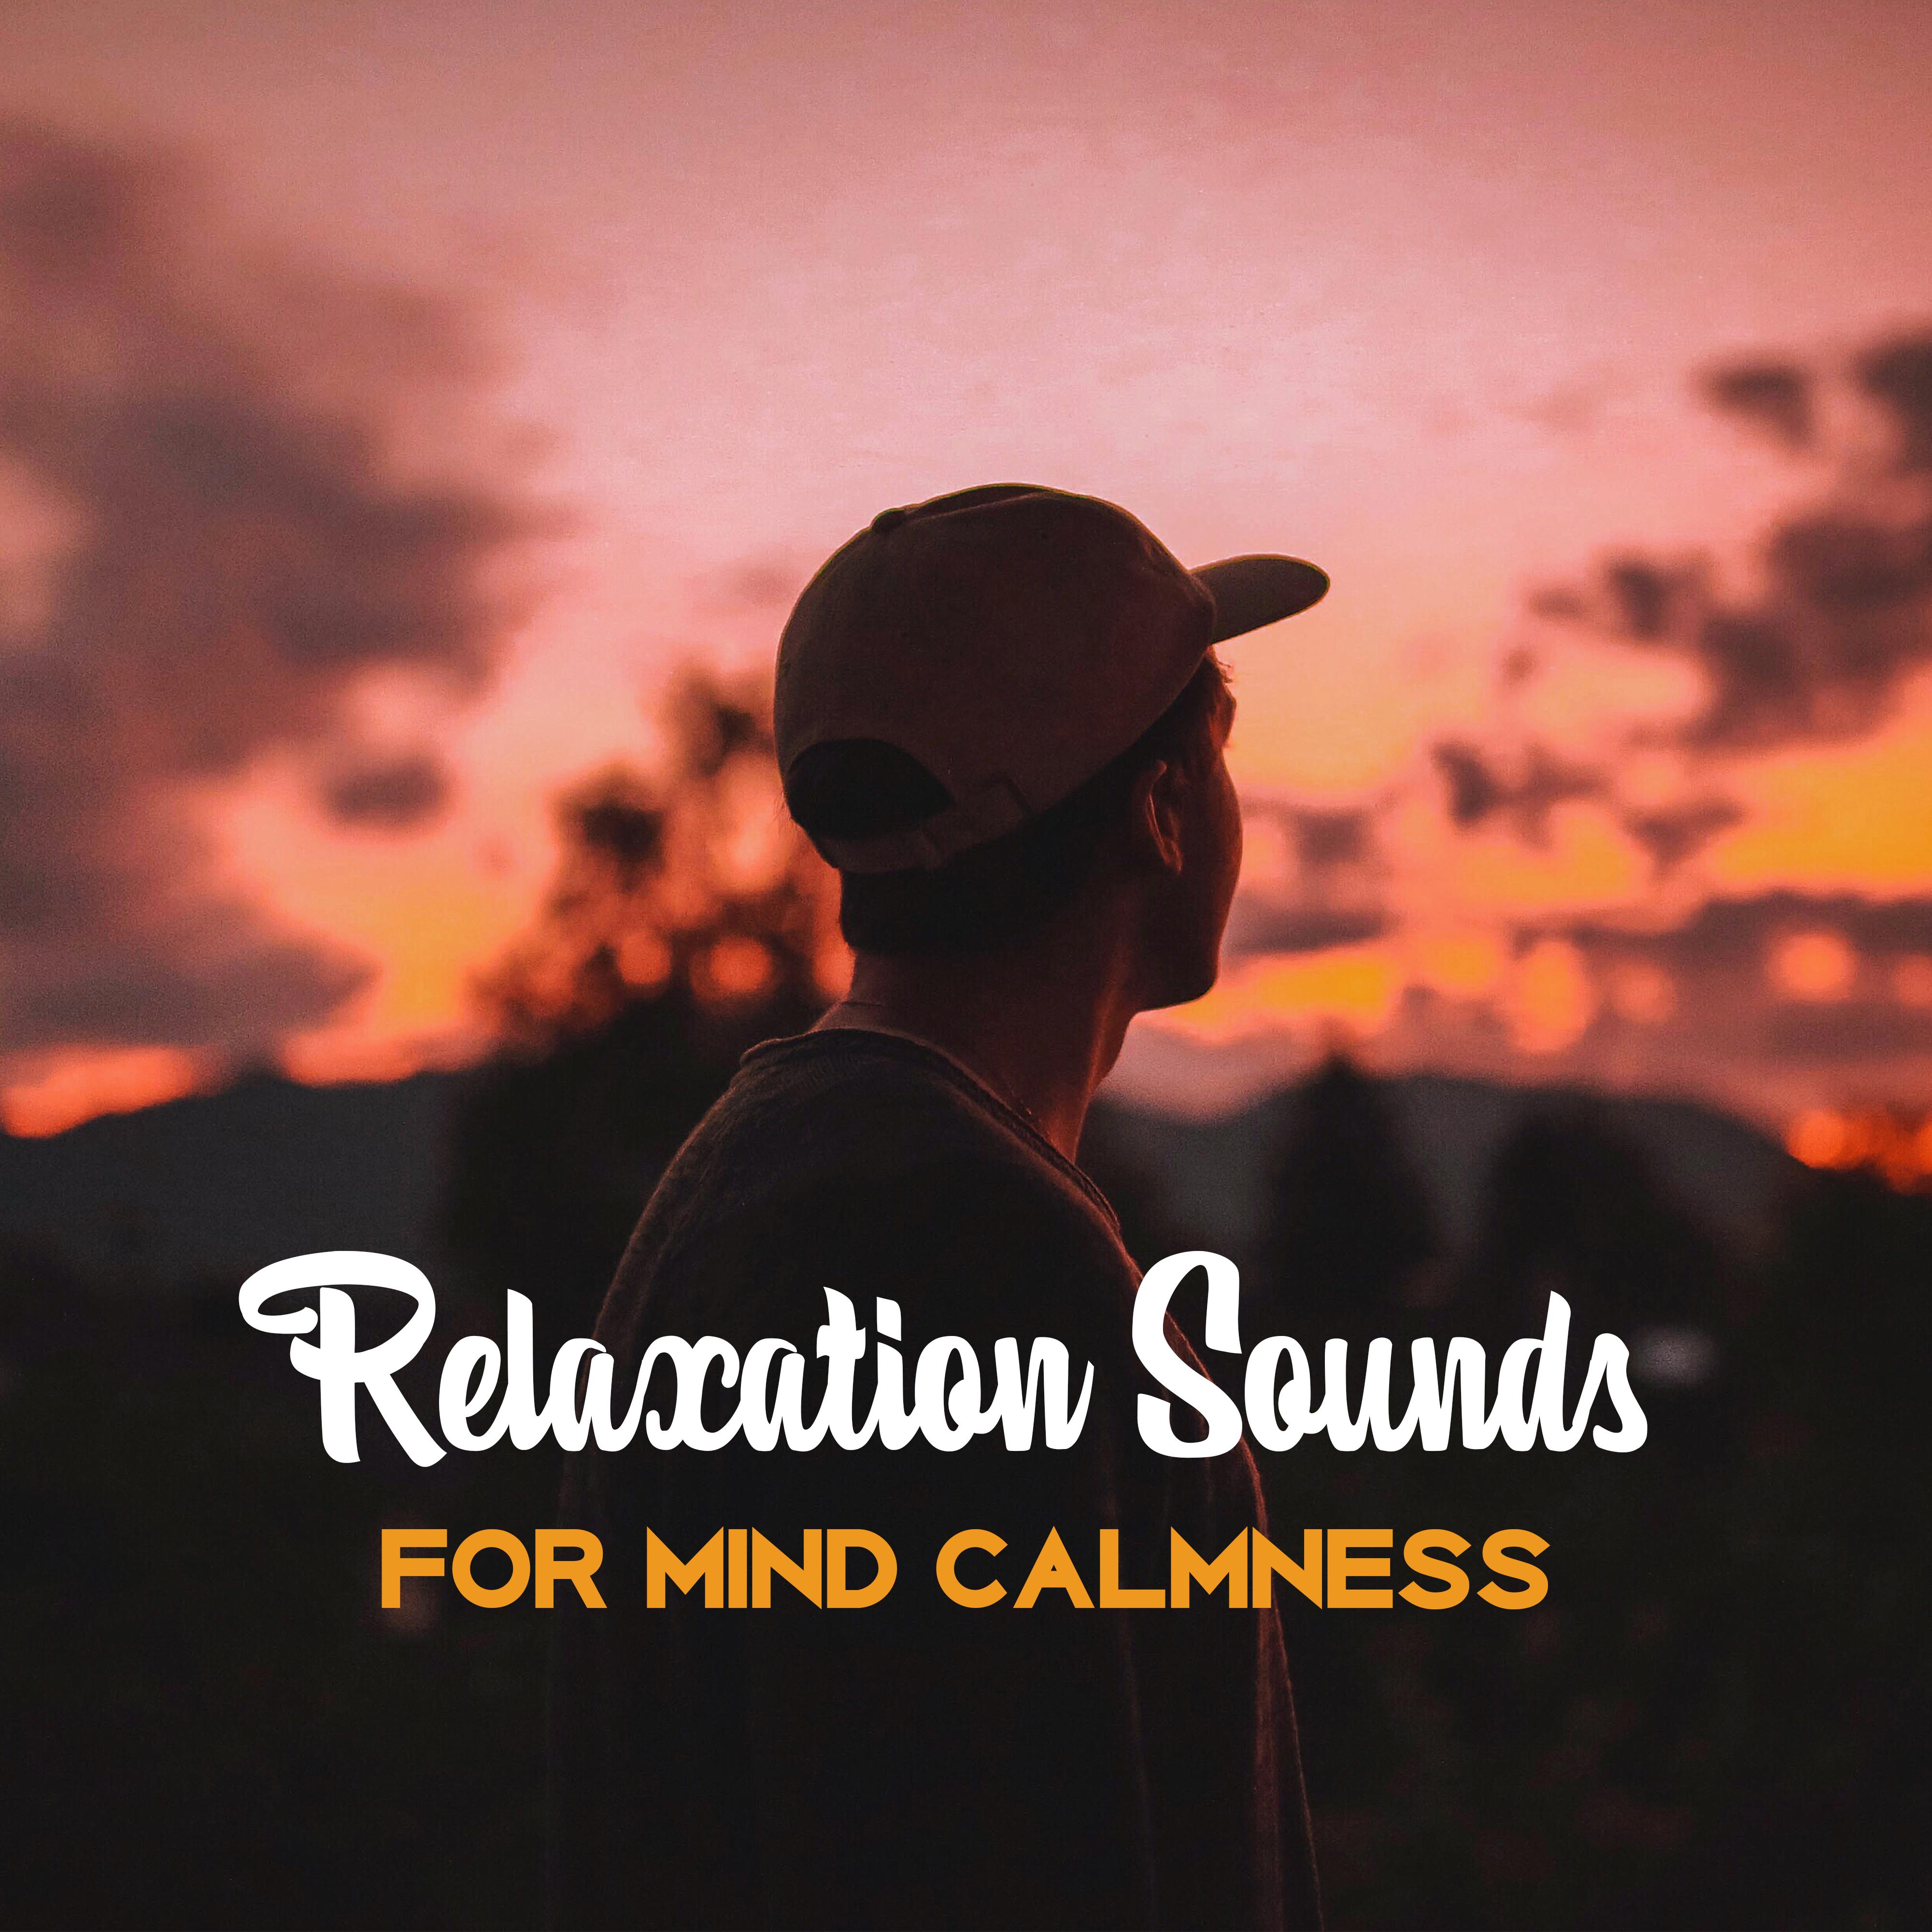 Relaxation Sounds for Mind Calmness  Soothing Sounds to Relax, New Age Music for Stress Relief, Time to Rest